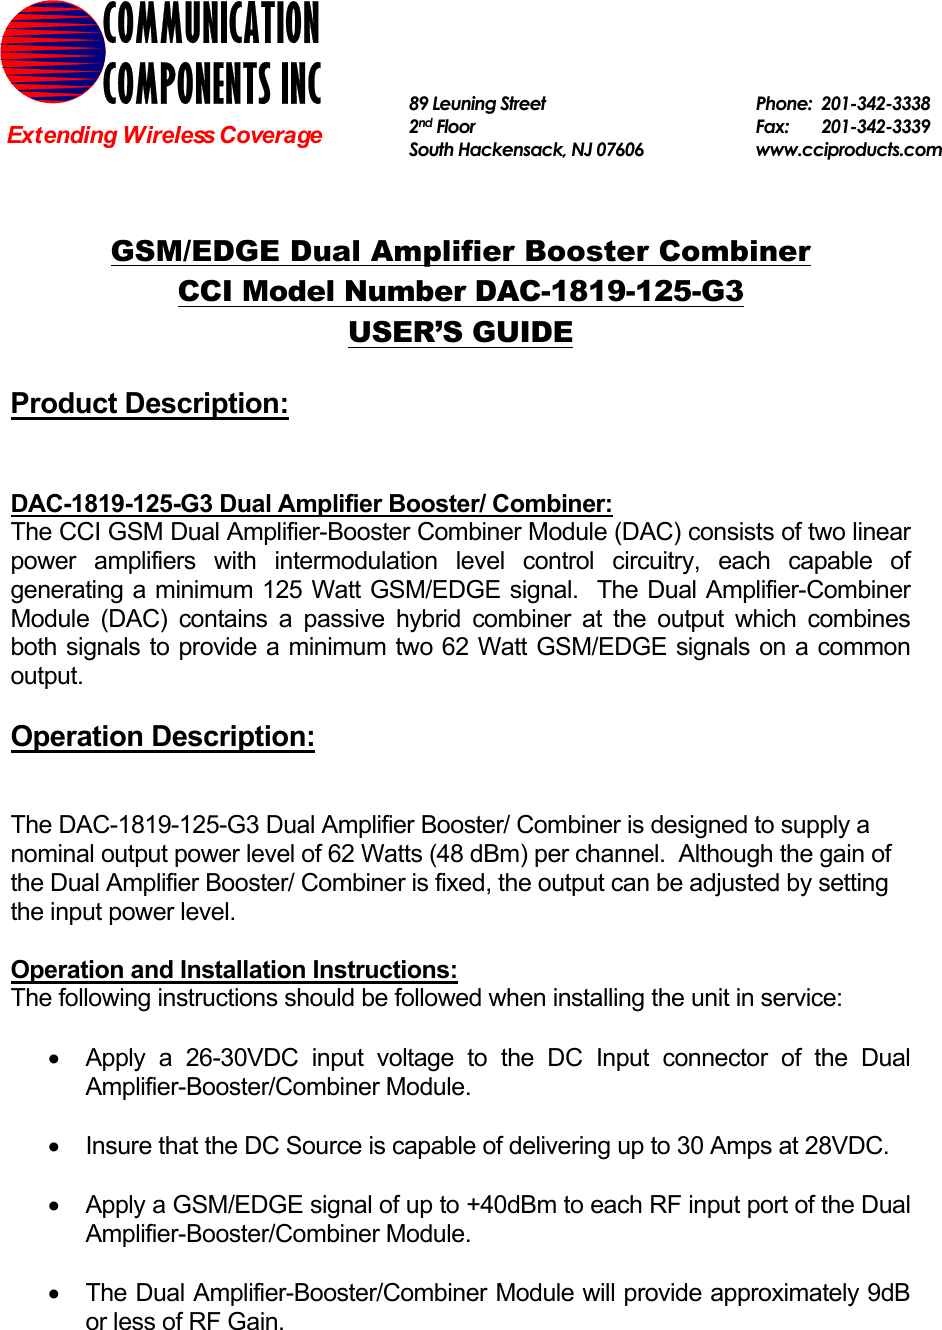   GSM/EDGE Dual Amplifier Booster Combiner CCI Model Number DAC-1819-125-G3 USER’S GUIDE  Product Description:   DAC-1819-125-G3 Dual Amplifier Booster/ Combiner: The CCI GSM Dual Amplifier-Booster Combiner Module (DAC) consists of two linear power amplifiers with intermodulation level control circuitry, each capable of generating a minimum 125 Watt GSM/EDGE signal.  The Dual Amplifier-Combiner Module (DAC) contains a passive hybrid combiner at the output which combines both signals to provide a minimum two 62 Watt GSM/EDGE signals on a common output.  Operation Description:   The DAC-1819-125-G3 Dual Amplifier Booster/ Combiner is designed to supply a nominal output power level of 62 Watts (48 dBm) per channel.  Although the gain of the Dual Amplifier Booster/ Combiner is fixed, the output can be adjusted by setting the input power level.    Operation and Installation Instructions: The following instructions should be followed when installing the unit in service:  •  Apply a 26-30VDC input voltage to the DC Input connector of the Dual Amplifier-Booster/Combiner Module.  •  Insure that the DC Source is capable of delivering up to 30 Amps at 28VDC.  •  Apply a GSM/EDGE signal of up to +40dBm to each RF input port of the Dual Amplifier-Booster/Combiner Module.  •  The Dual Amplifier-Booster/Combiner Module will provide approximately 9dB or less of RF Gain.  COMMUNICATION COMPONENTS INC Extending Wireless Coverage 89 Leuning Street   Phone: 201-342-3338 2nd Floor  Fax:   201-342-3339 South Hackensack, NJ 07606   www.cciproducts.com  